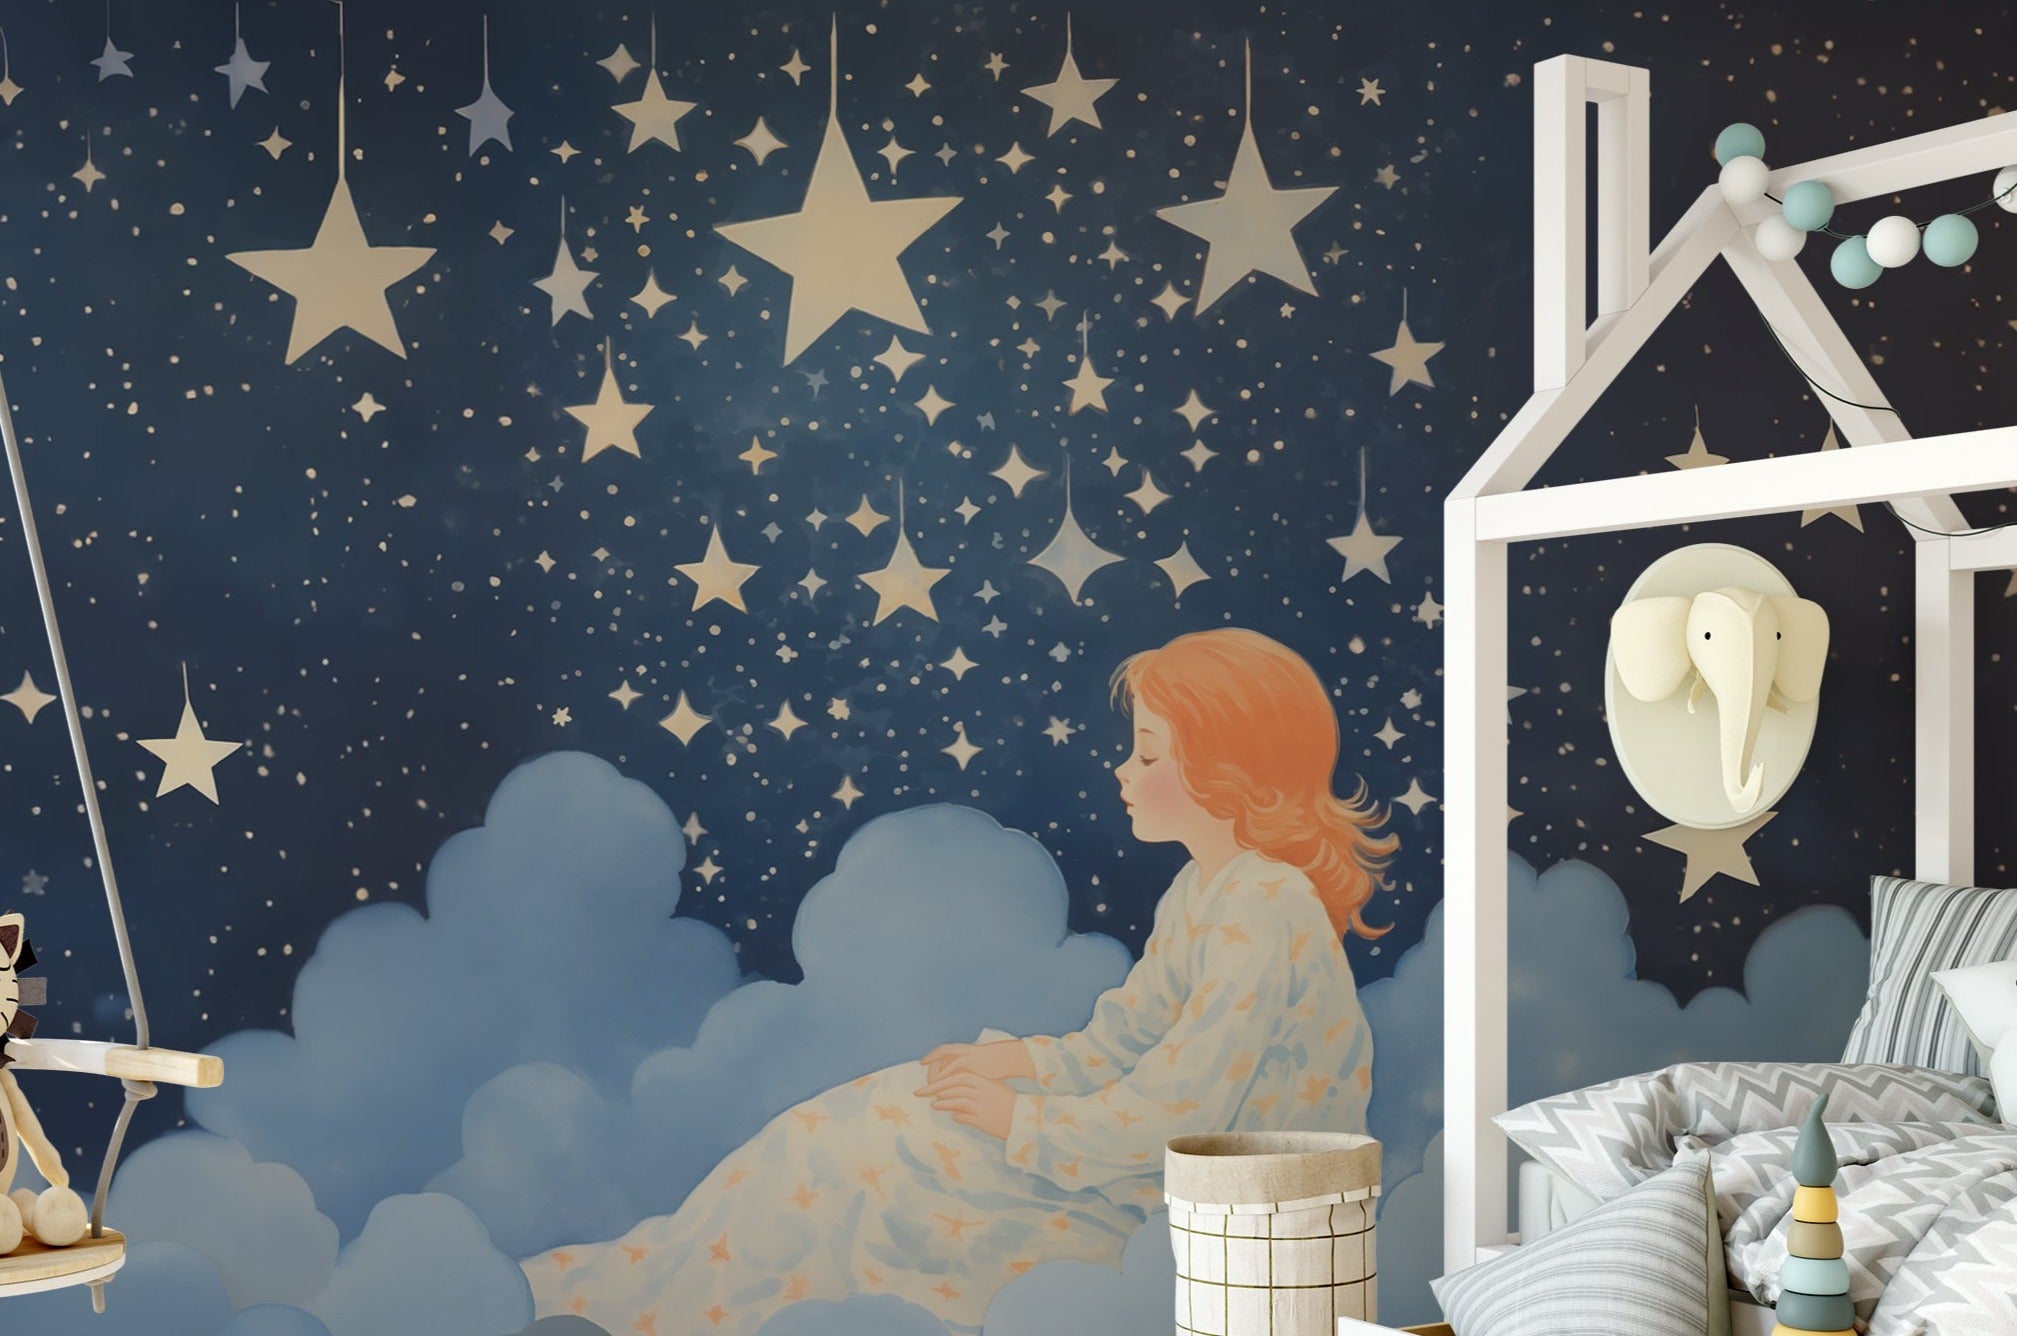 Bedroom for a child showcasing the 'Sweet Dreams Mural' on the wall, complemented by star-themed decor and soft toys.